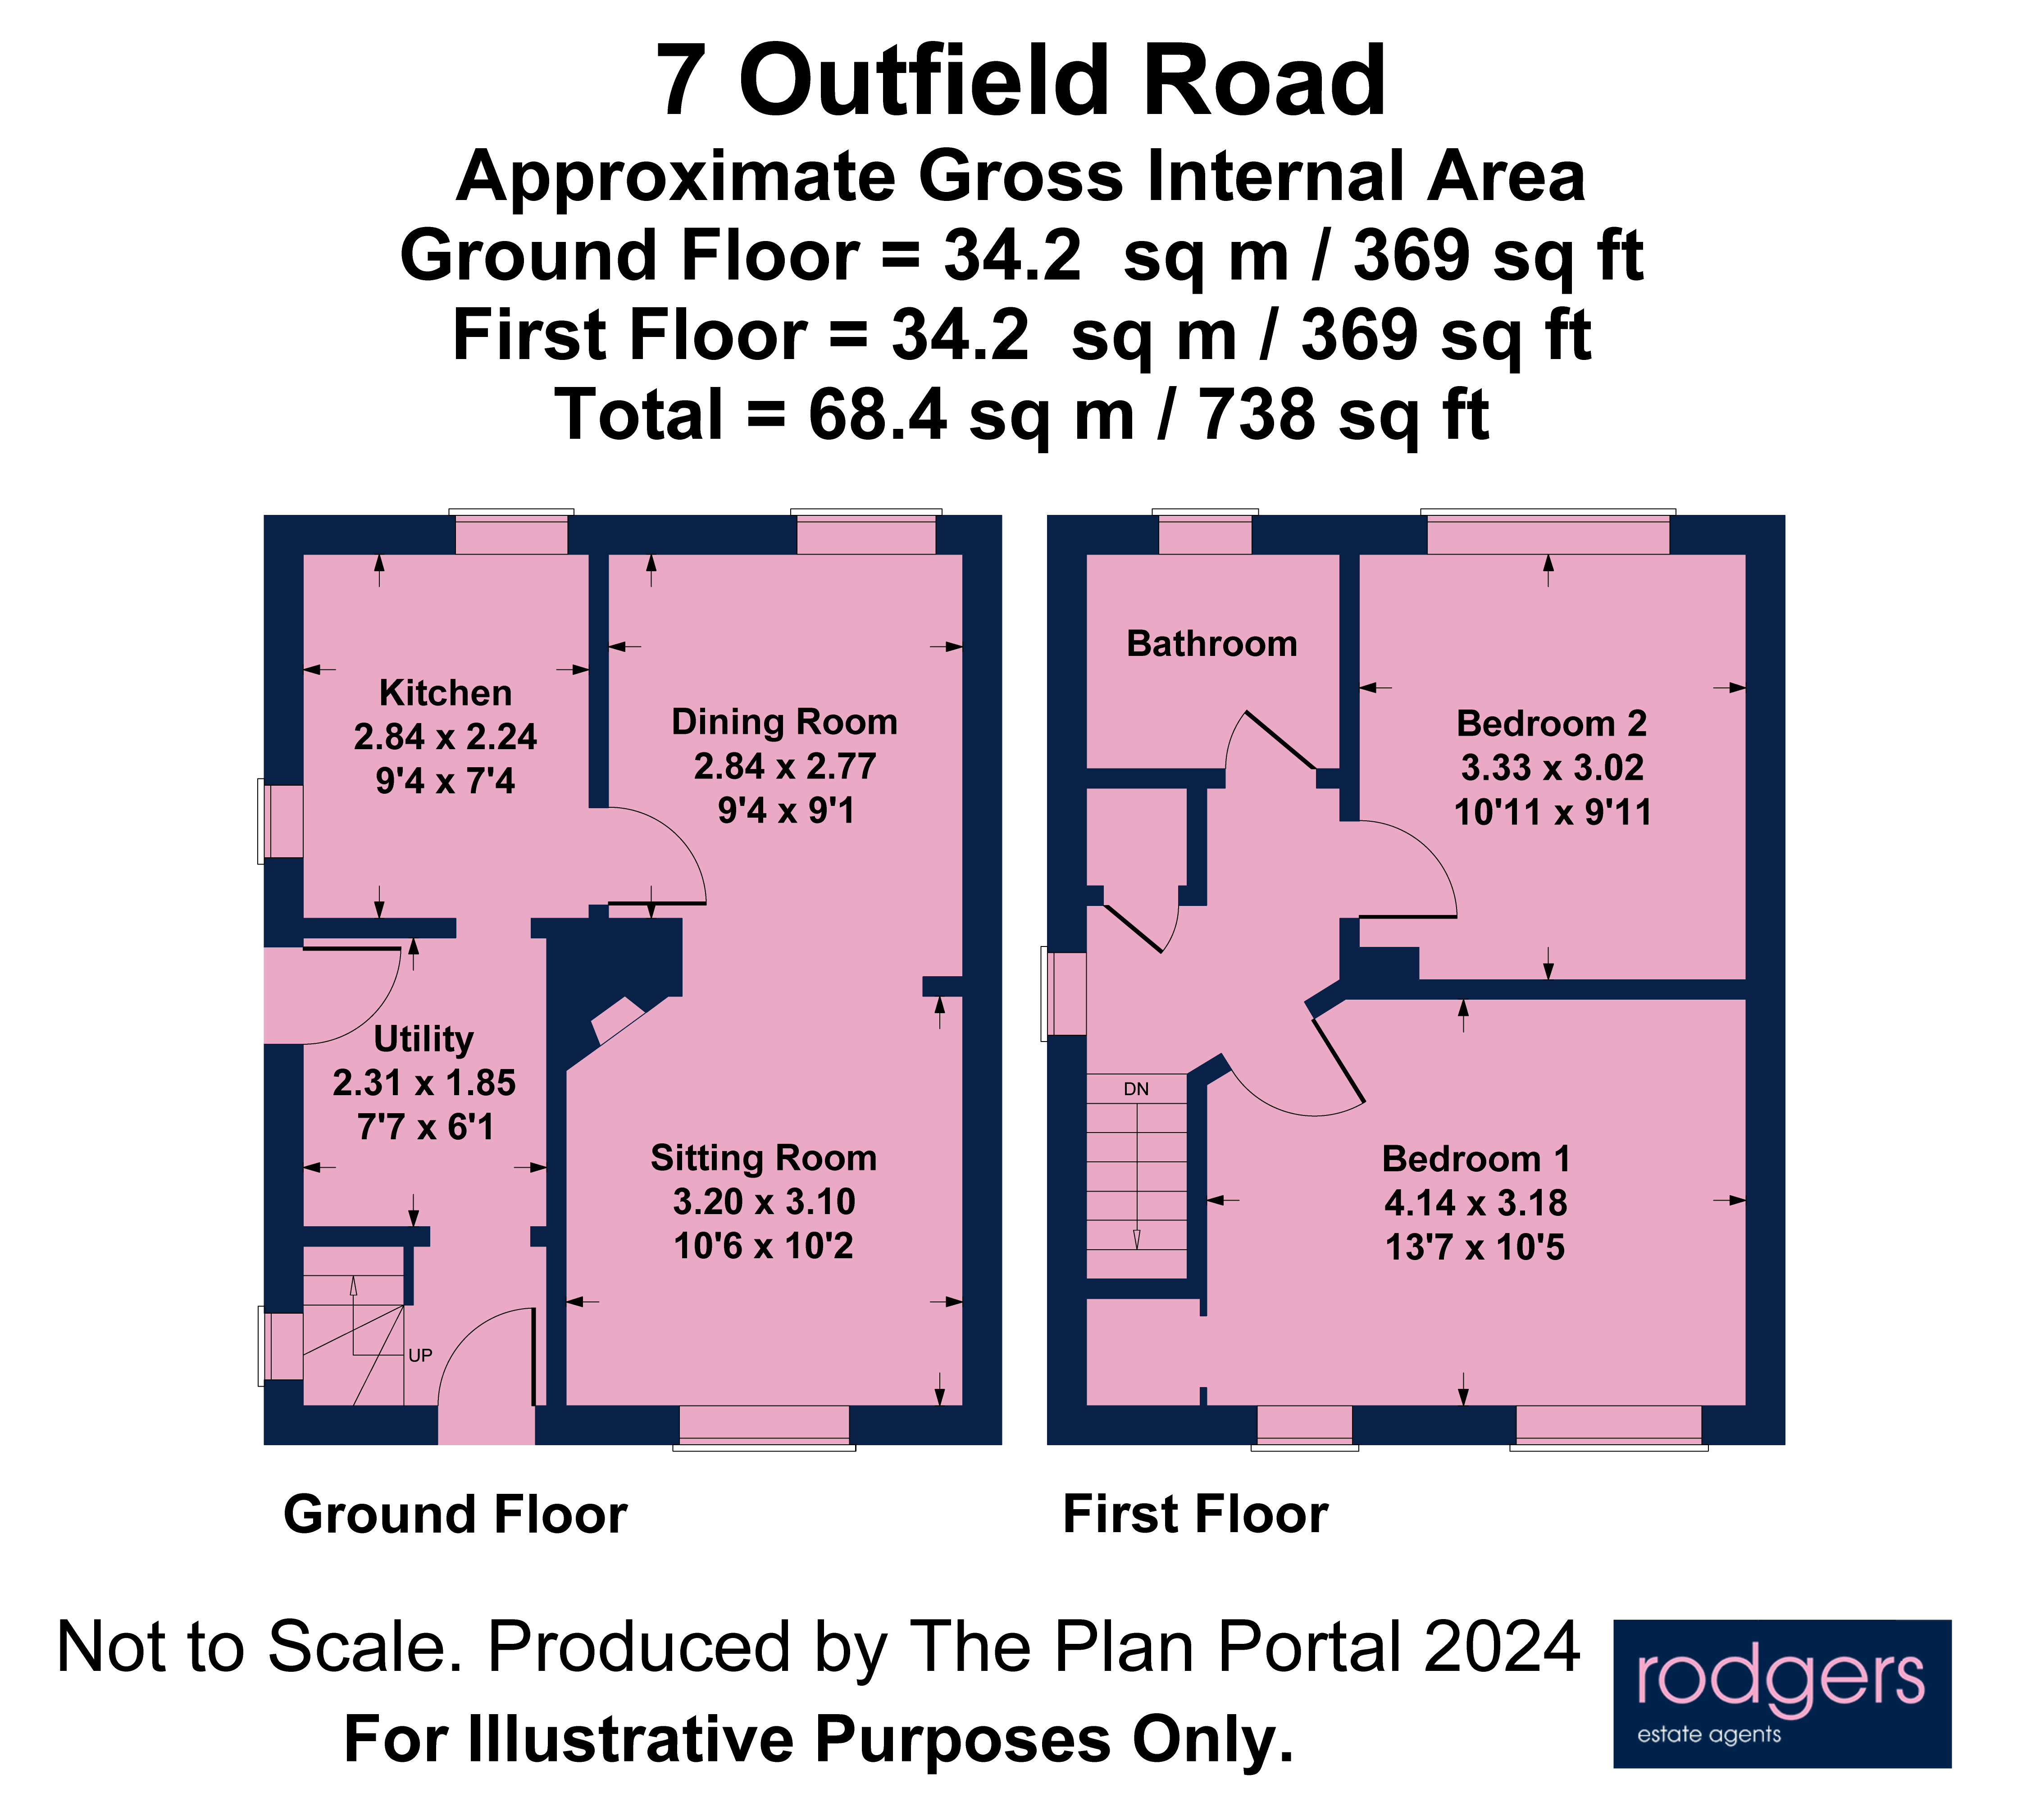 Floorplans For Outfield Road, Chalfont St Peter, Buckinghamshire